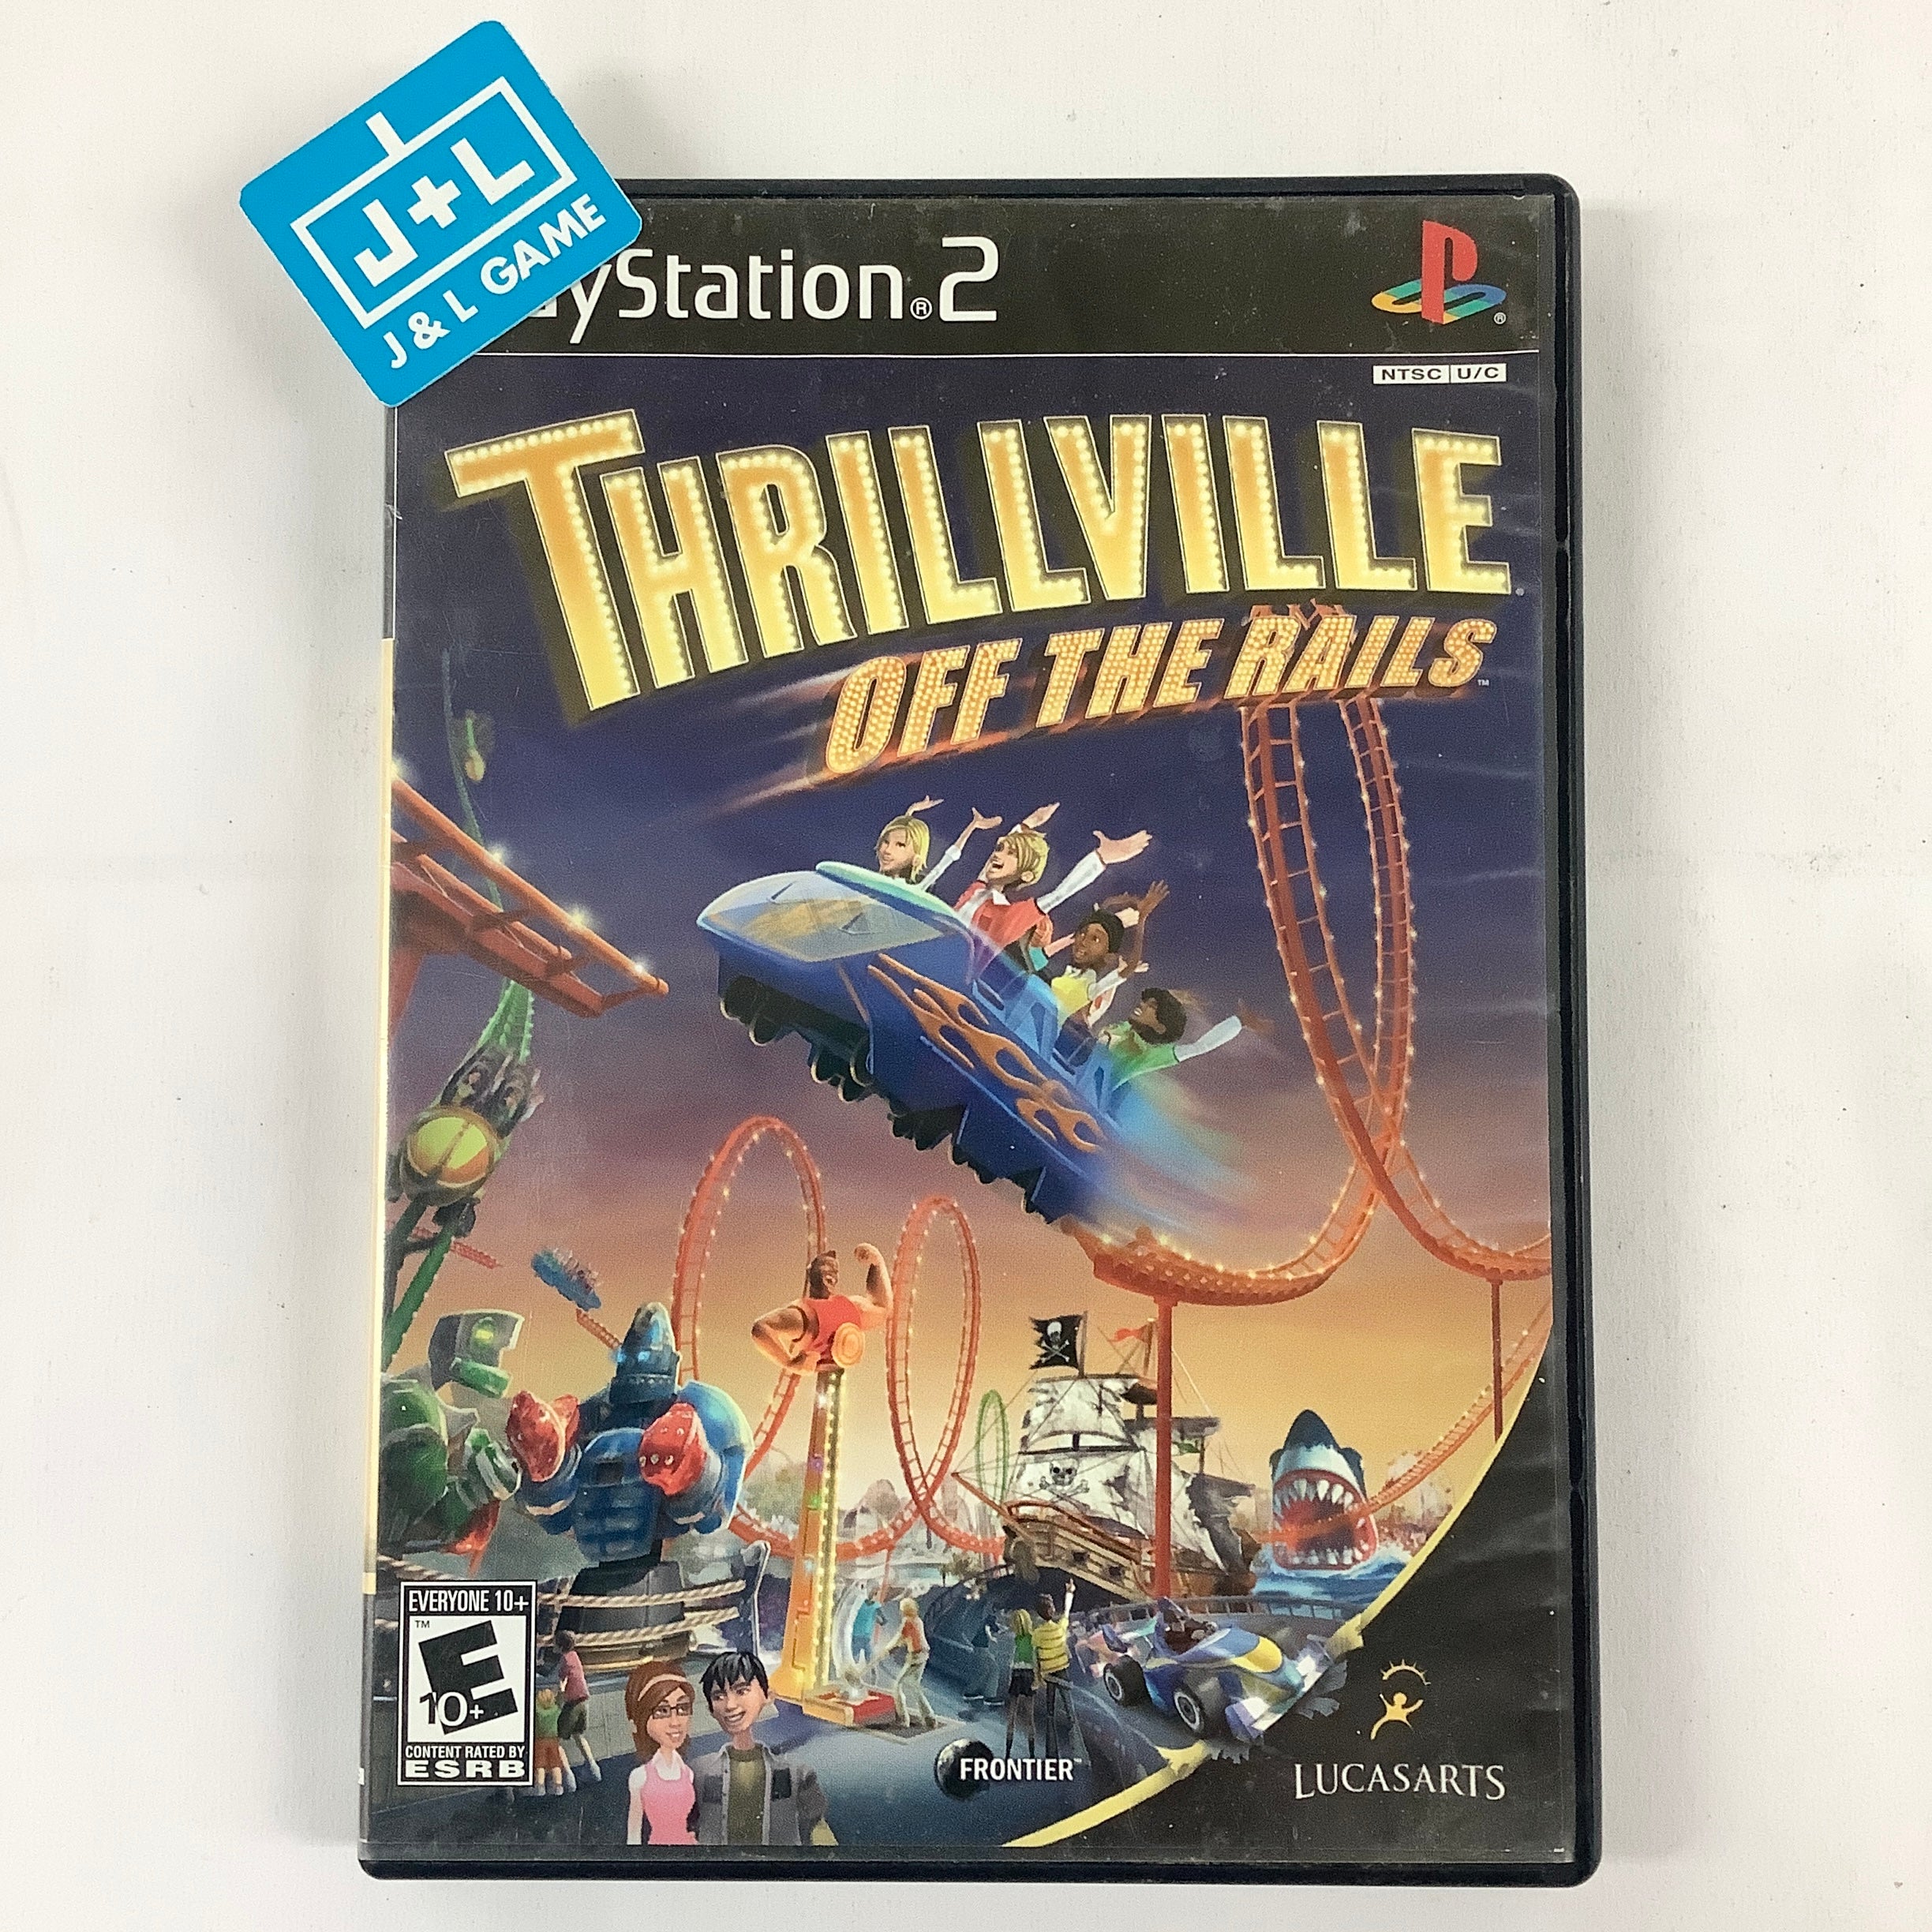 Thrillville: Off the Rails - (PS2) PlayStation 2 [Pre-Owned] Video Games LucasArts   